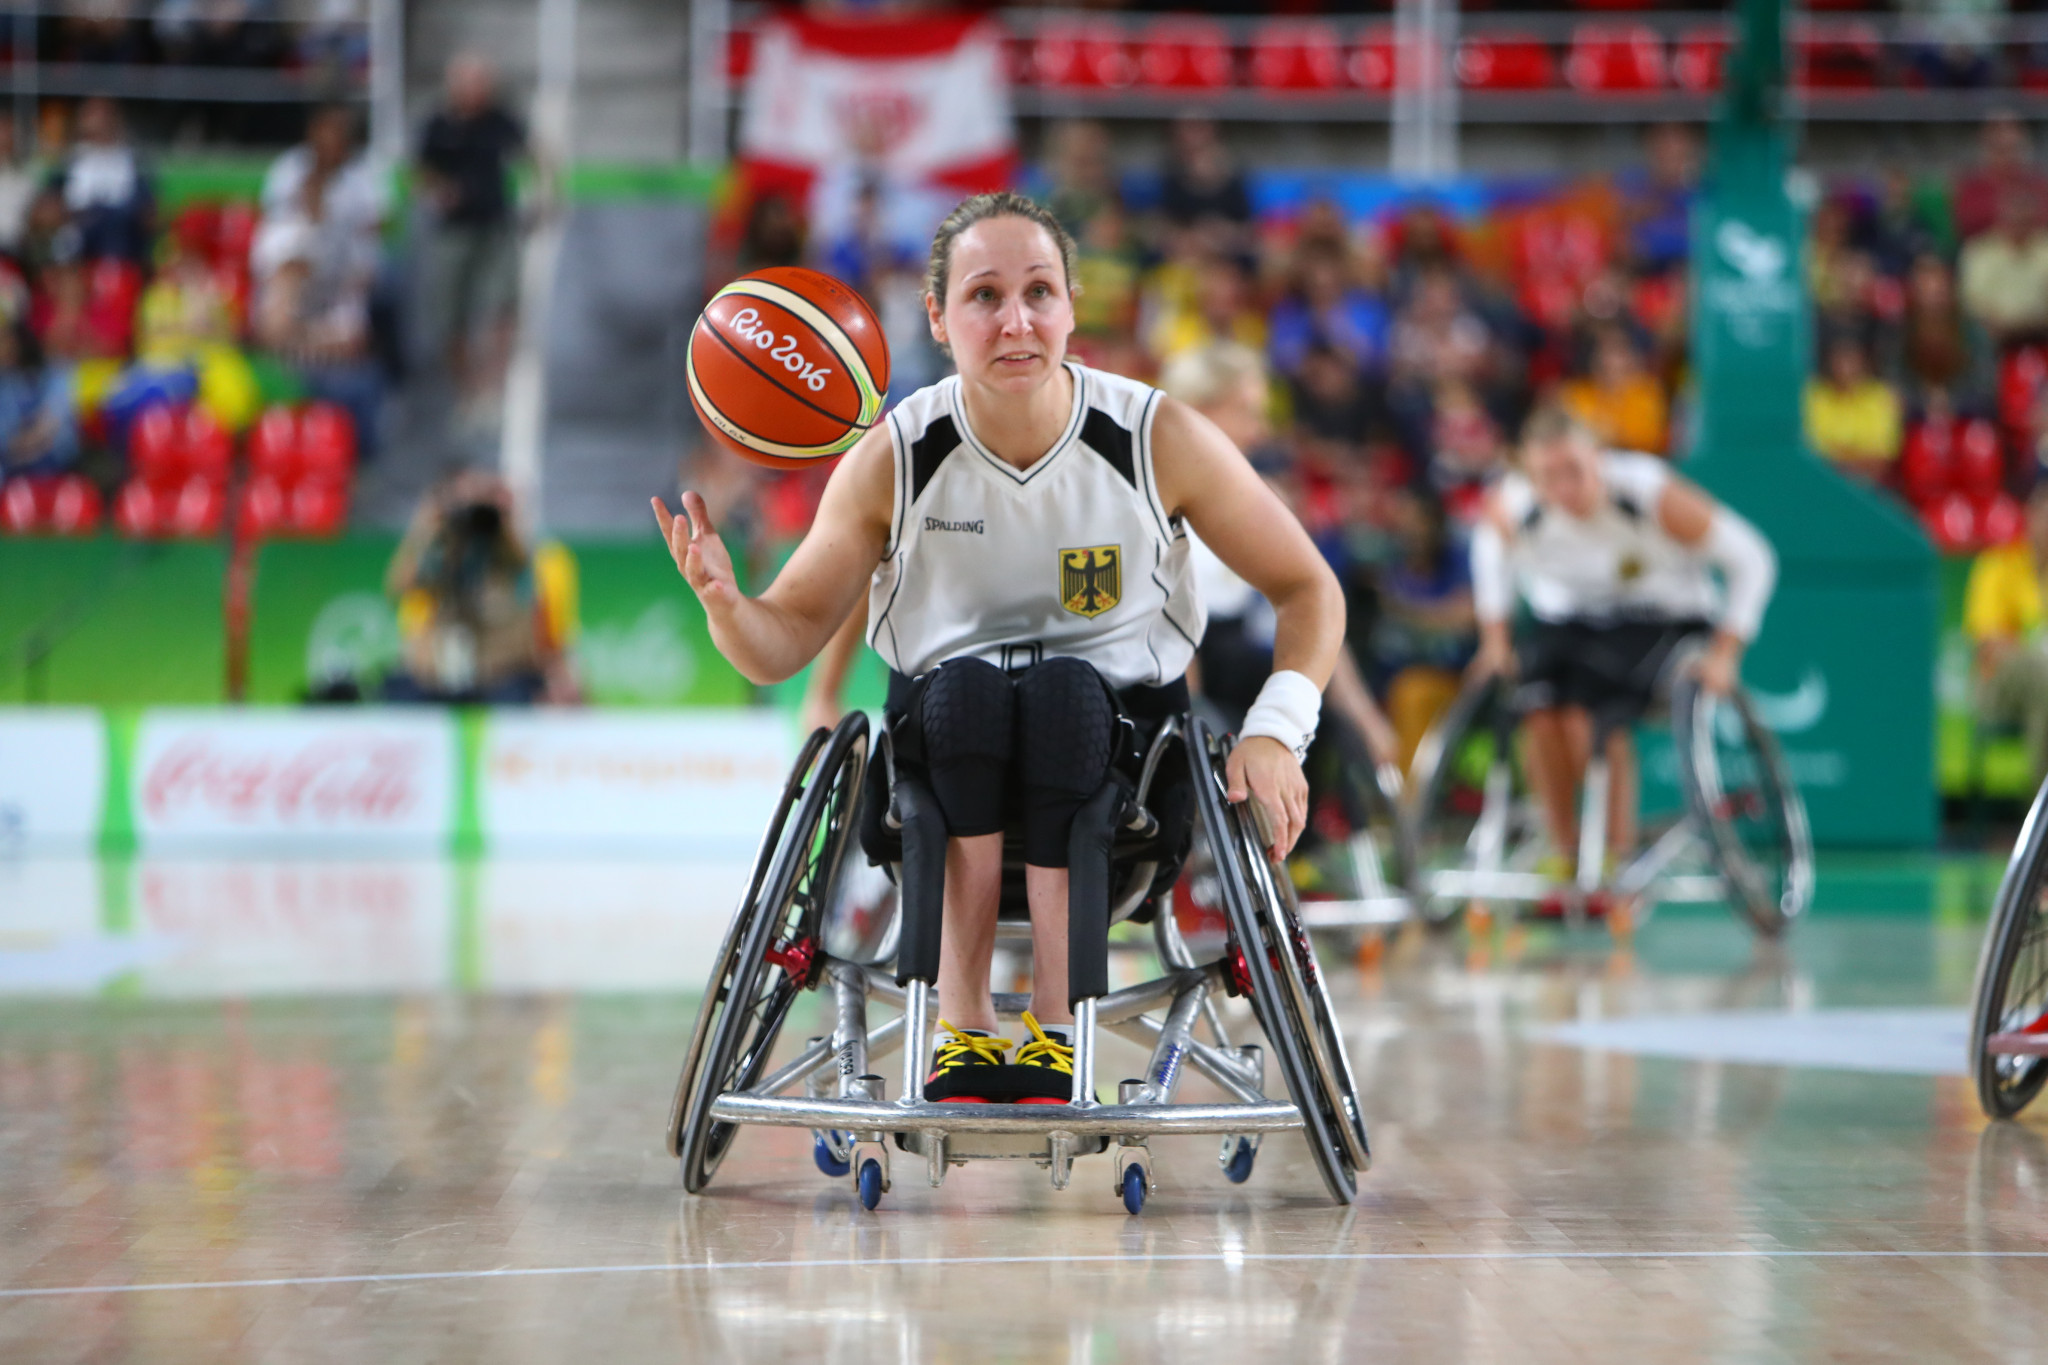 Annika Zeyen won Paralympic gold in wheelchair basketball at London 2012 and has also competed in athletics and cycling ©Getty Images